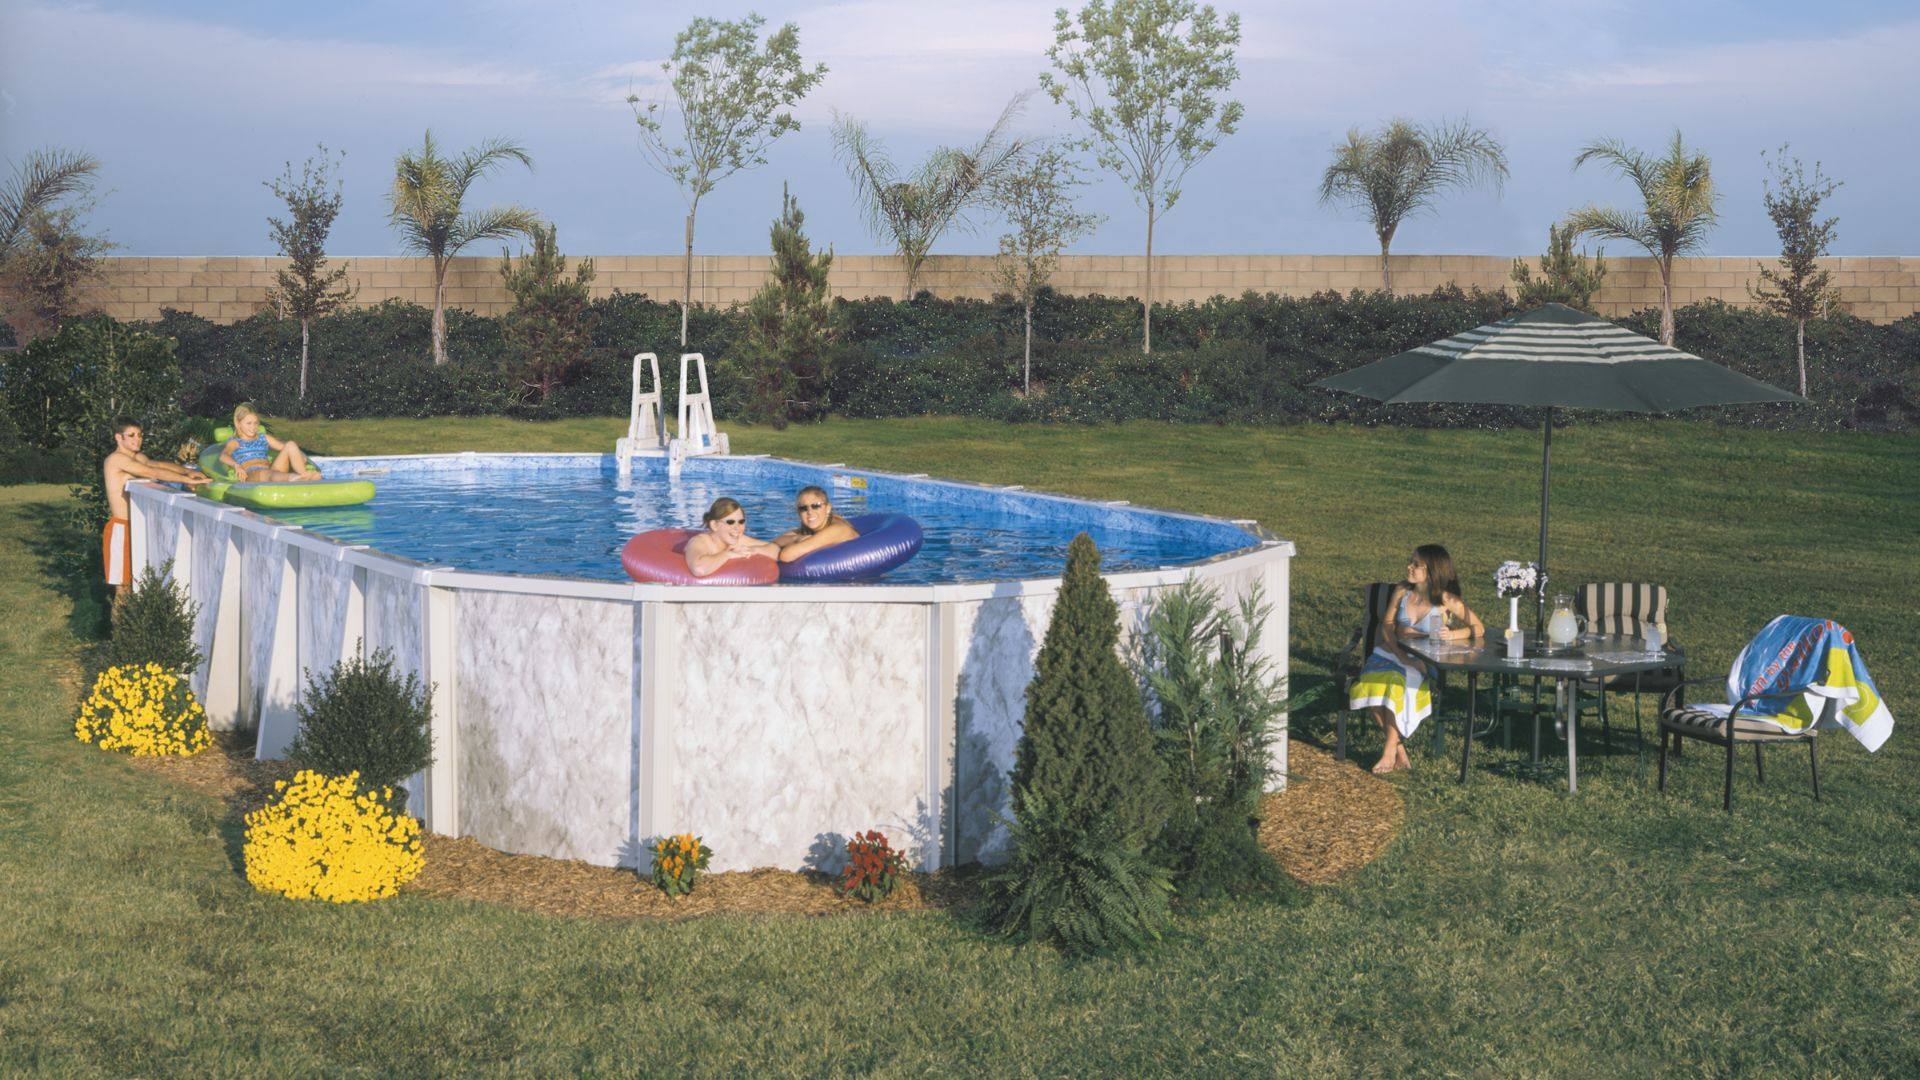 Above-ground pool accessories make pool ownership fun and easy.